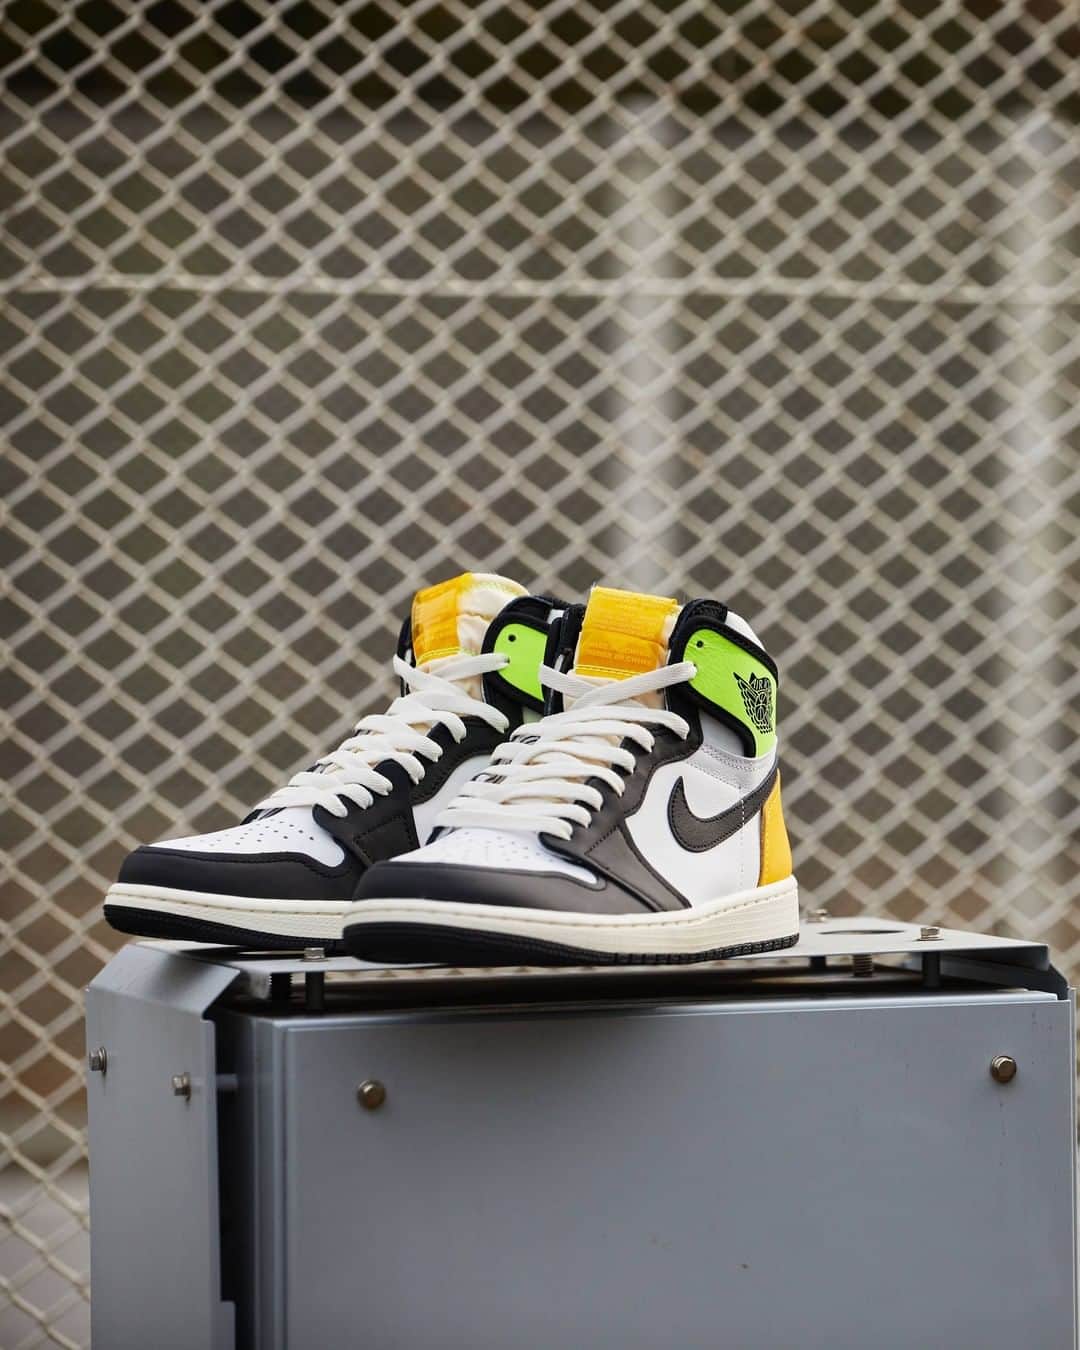 アトモスさんのインスタグラム写真 - (アトモスInstagram)「. 1/16(SAT)より、AIR JORDAN 1 RETRO HIGH OG "Volt Gold"が登場。 本革と合成皮革をアッパーに使用し、優れたクッショニングを発揮するAir-Soleユニットを内蔵したソリッドラバーのカップソールを採用。深いフレックスグルーブ (アウトソールやミッドソールにある溝) と同心円状のアウトソールパターンが、柔軟性に優れたトラクションを発揮。シュータンに露出したフォーム、トランスルーセント仕様のタグはデコンストラクトデザインを演出。ボルト、セイル、ユニバーシティゴールドの3色のカラーブロックデザインが、時代を超越したシルエットに力強いエネルギーを加える。 . From 1/16 (SAT), AIR JORDAN 1 RETRO HIGH OG "Volt Gold" will be released. A solid rubber cup sole with a built-in Air-Sole unit that uses genuine leather and synthetic leather for the upper and demonstrates excellent cushioning. Deep flex grooves (grooves on the outsole and midsole) and concentric outsole patterns provide flexible traction. The foam exposed on the tongue and the translucent tag create a deconstructed design. The three-color block design of bolt, sail and university gold adds powerful energy to the timeless silhouette. . #nike #airjordan1 #aj1 #jordan #atmos #ナイキ #エアジョーダン #アトモス」1月11日 11時13分 - atmos_japan